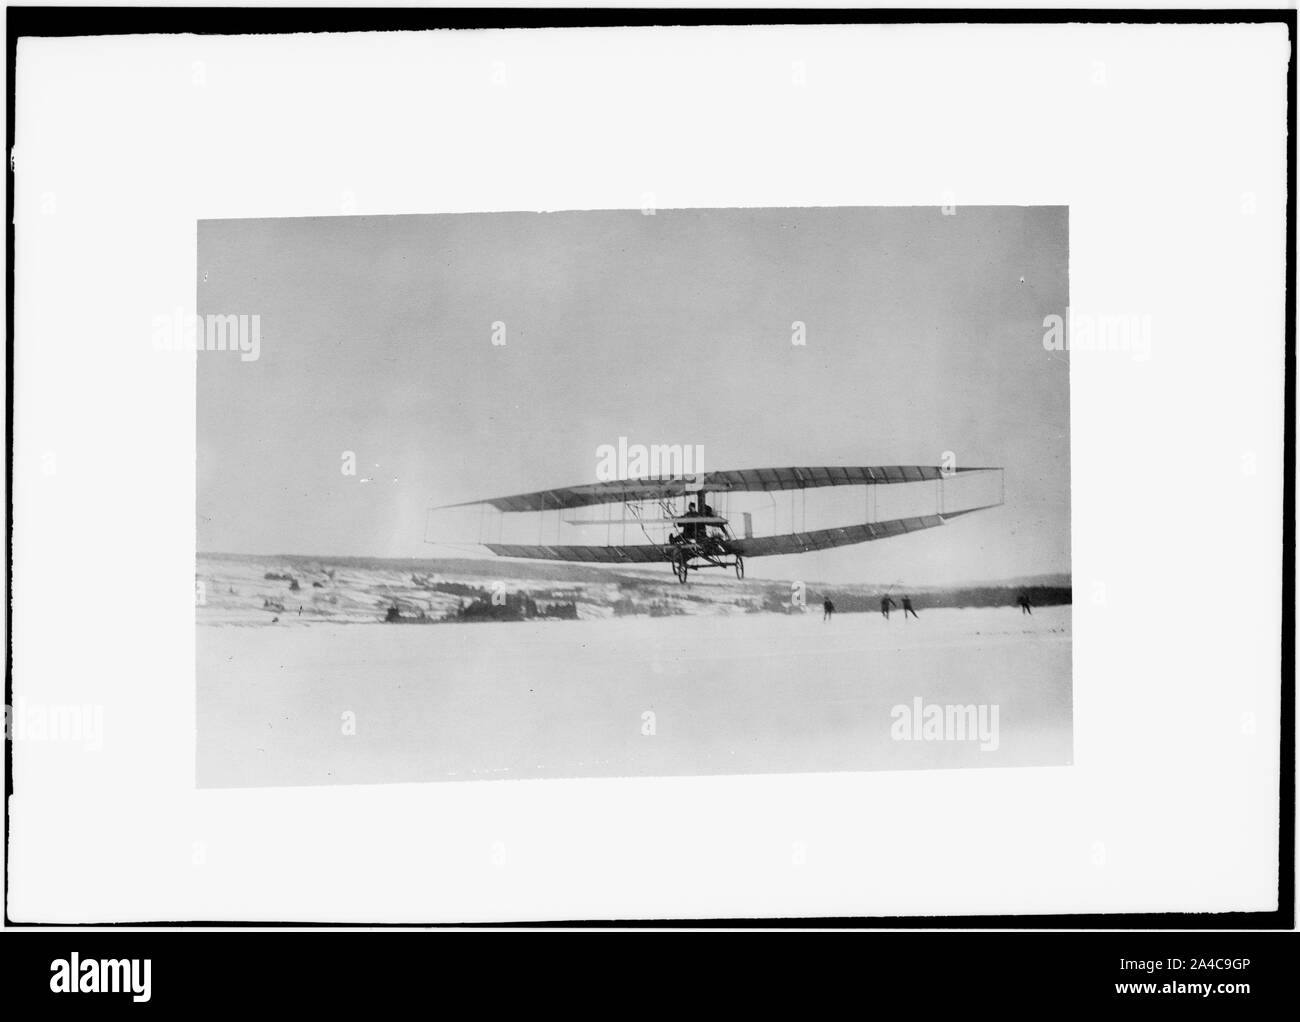 The Silver Dart, one of the Aerial Experiment Association's early airplanes, in flight over the frozen Bras d'Or Lake on Cape Breton Island Stock Photo